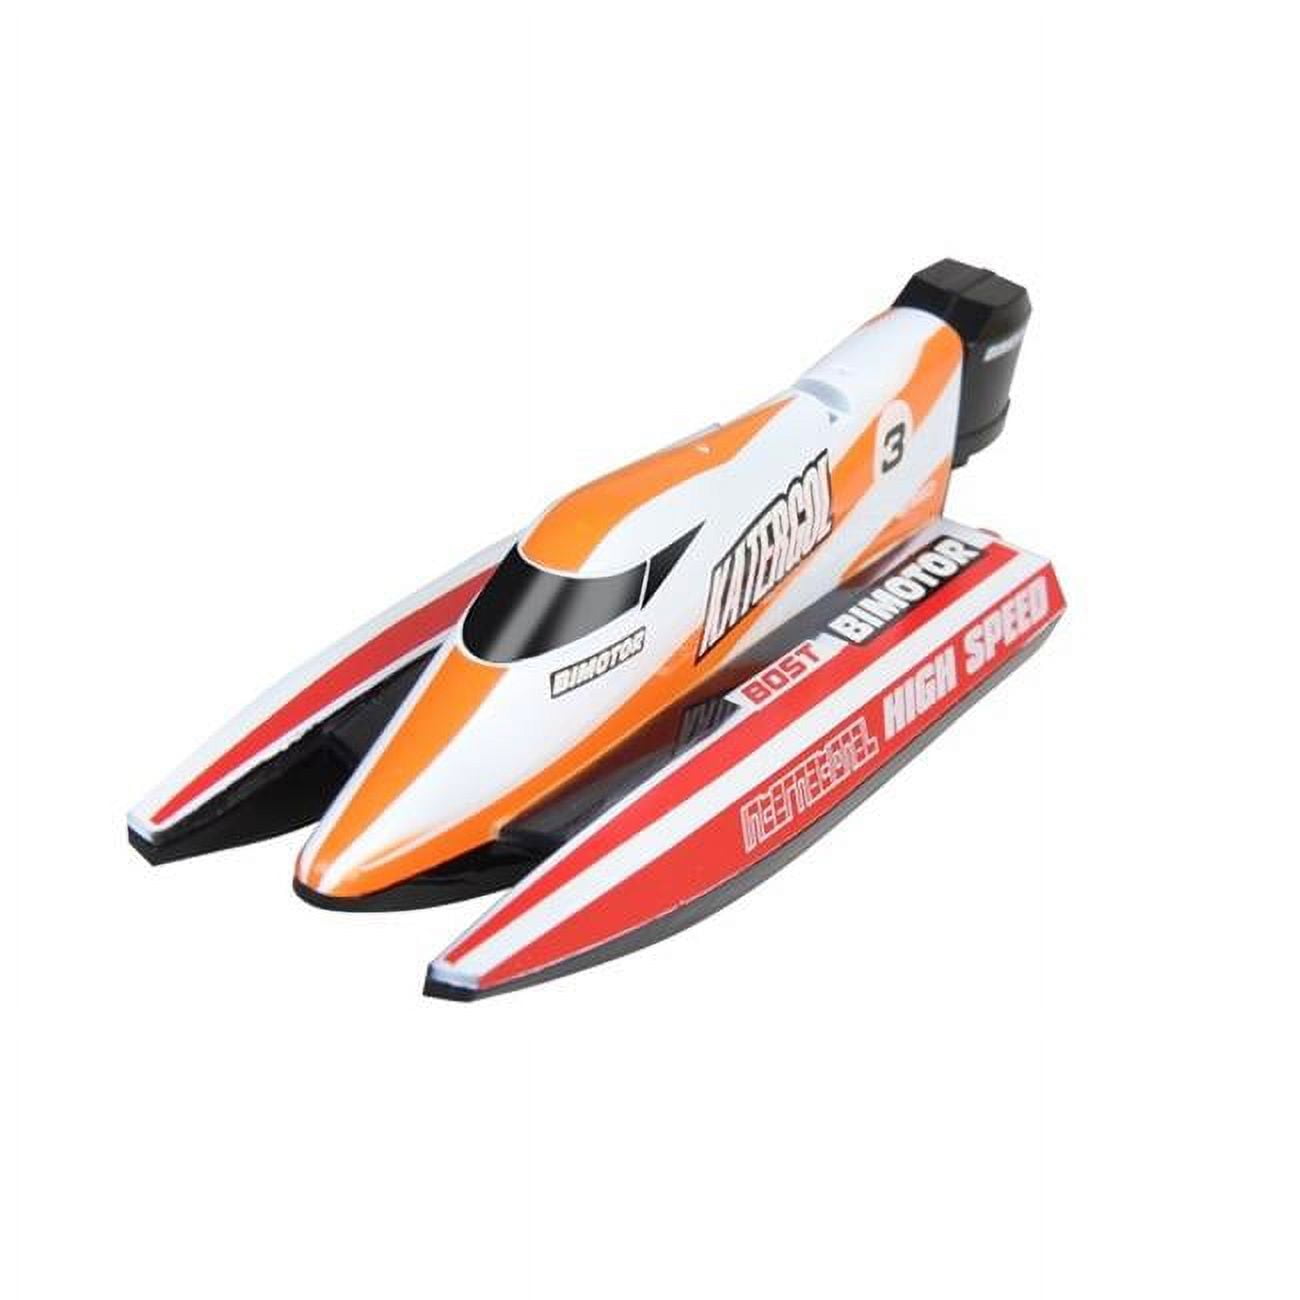 Picture of CIS-Associates 3313M-O Micro 2.4 GHz Formula 1 Speed Boat with Decals, Orange